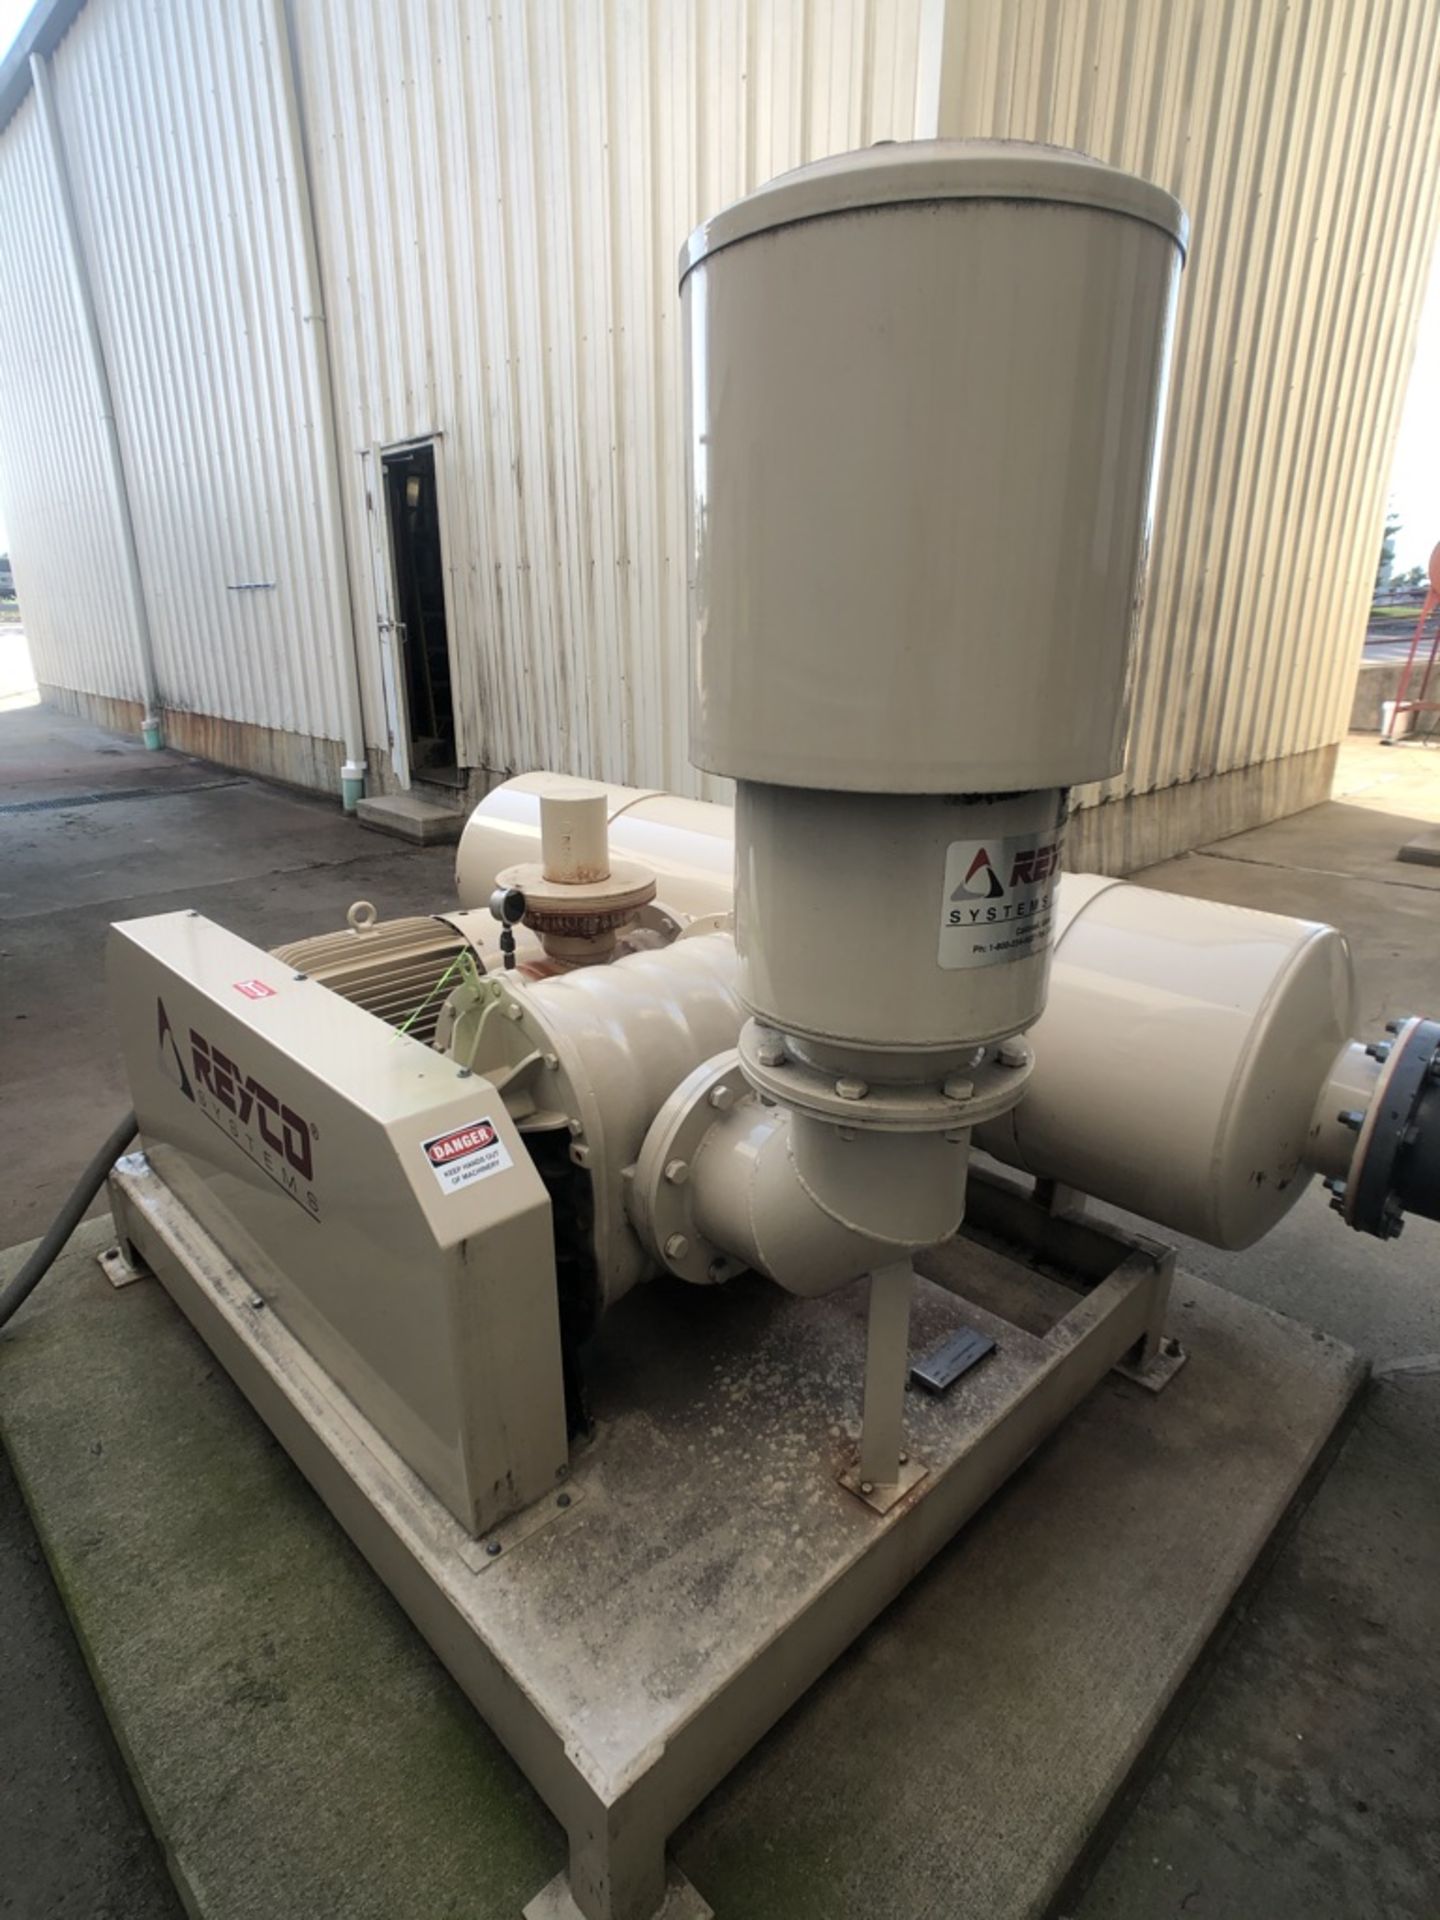 2016 REYCO SKID-MOUNTED ROTARY POSITIVE DISPLACEMENT BLOWER PACKAGE, MODEL 718 URAI 50 HP BLOWER - Image 14 of 14